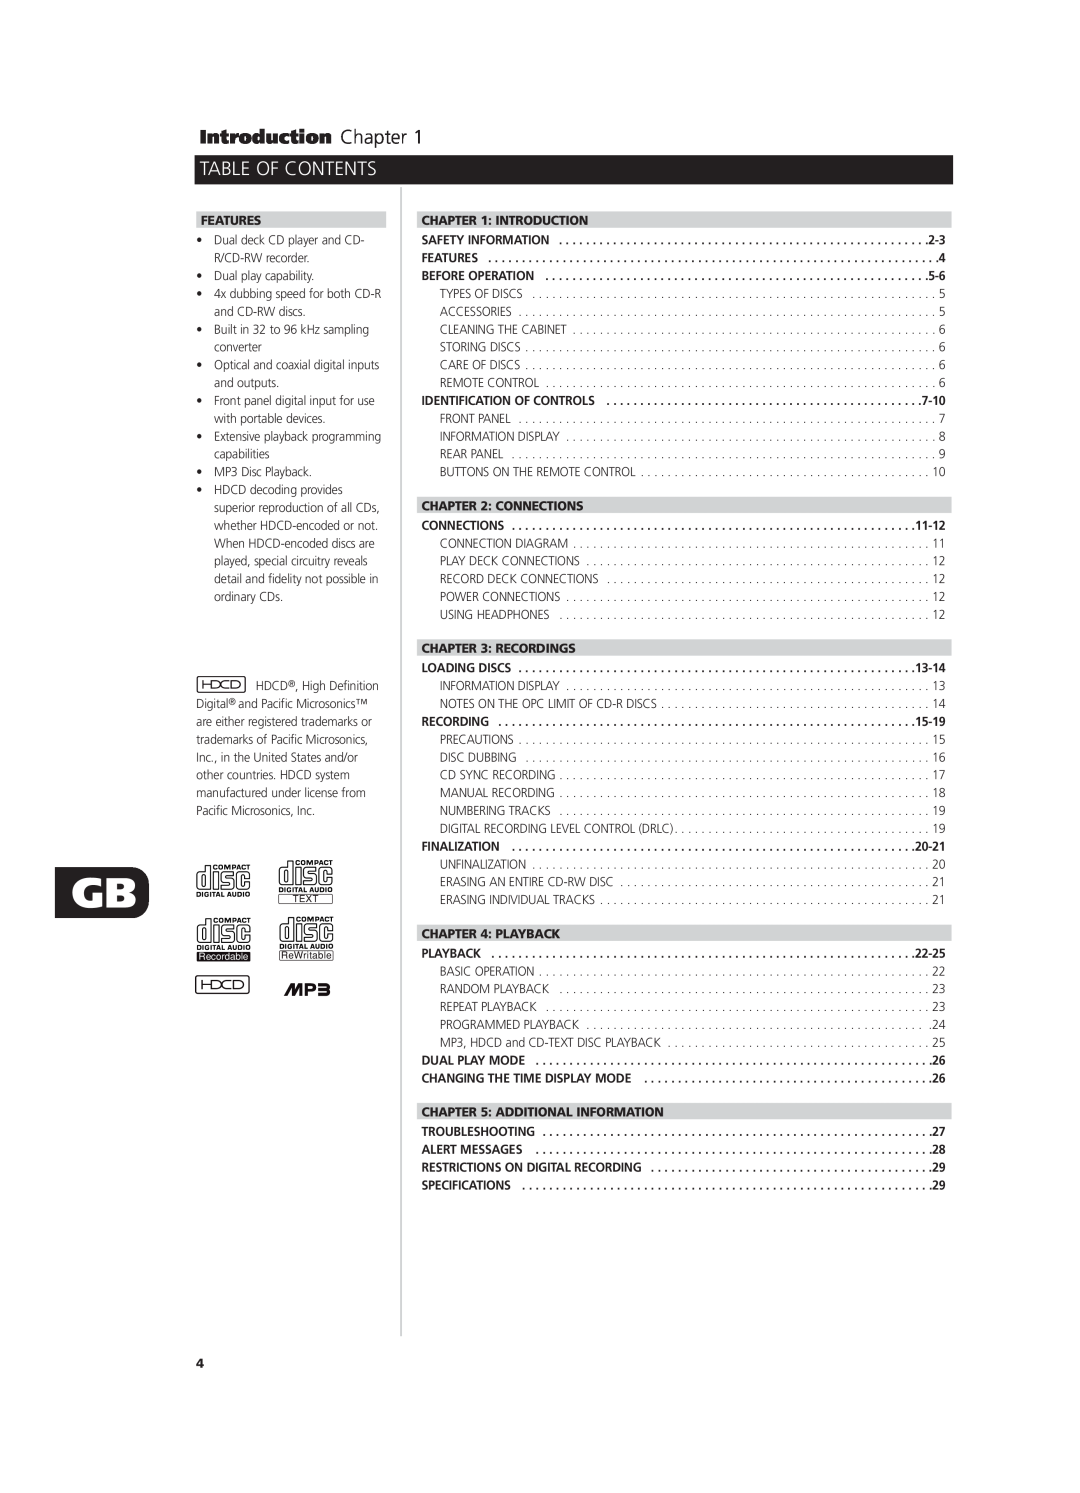 NAD C660 owner manual Table Of Contents, Features, Introduction, Connections, Recordings, Playback, Additional Information 